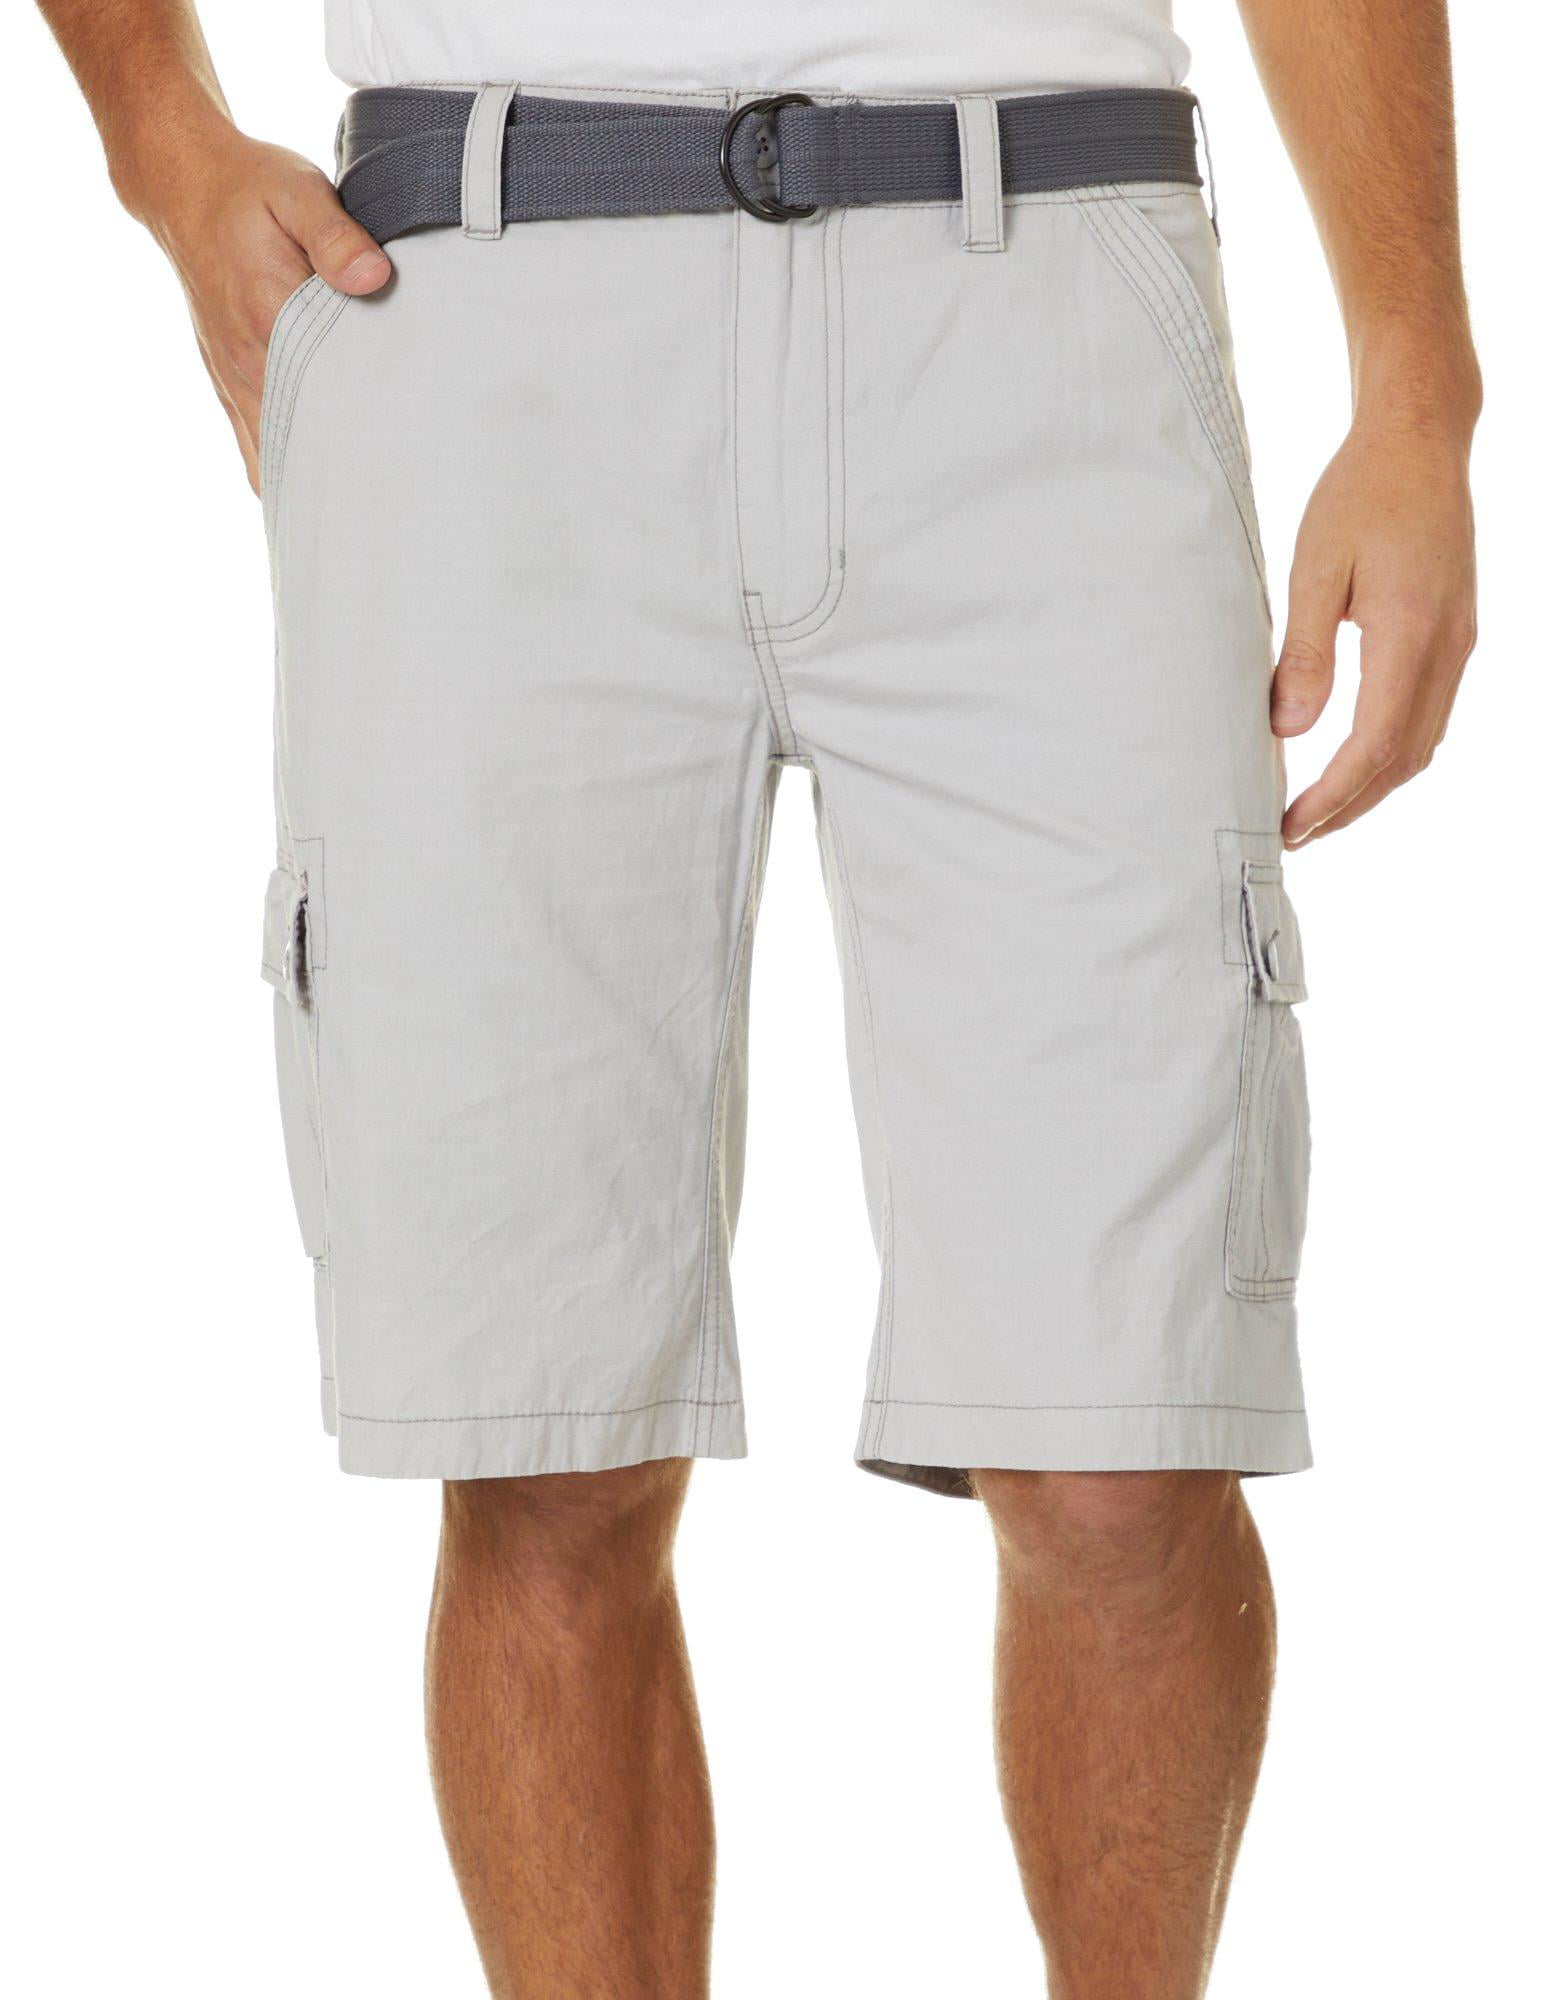 Wearfirst - Wearfirst Mens Solid Cotton Ripstop Belted Cargo Shorts ...